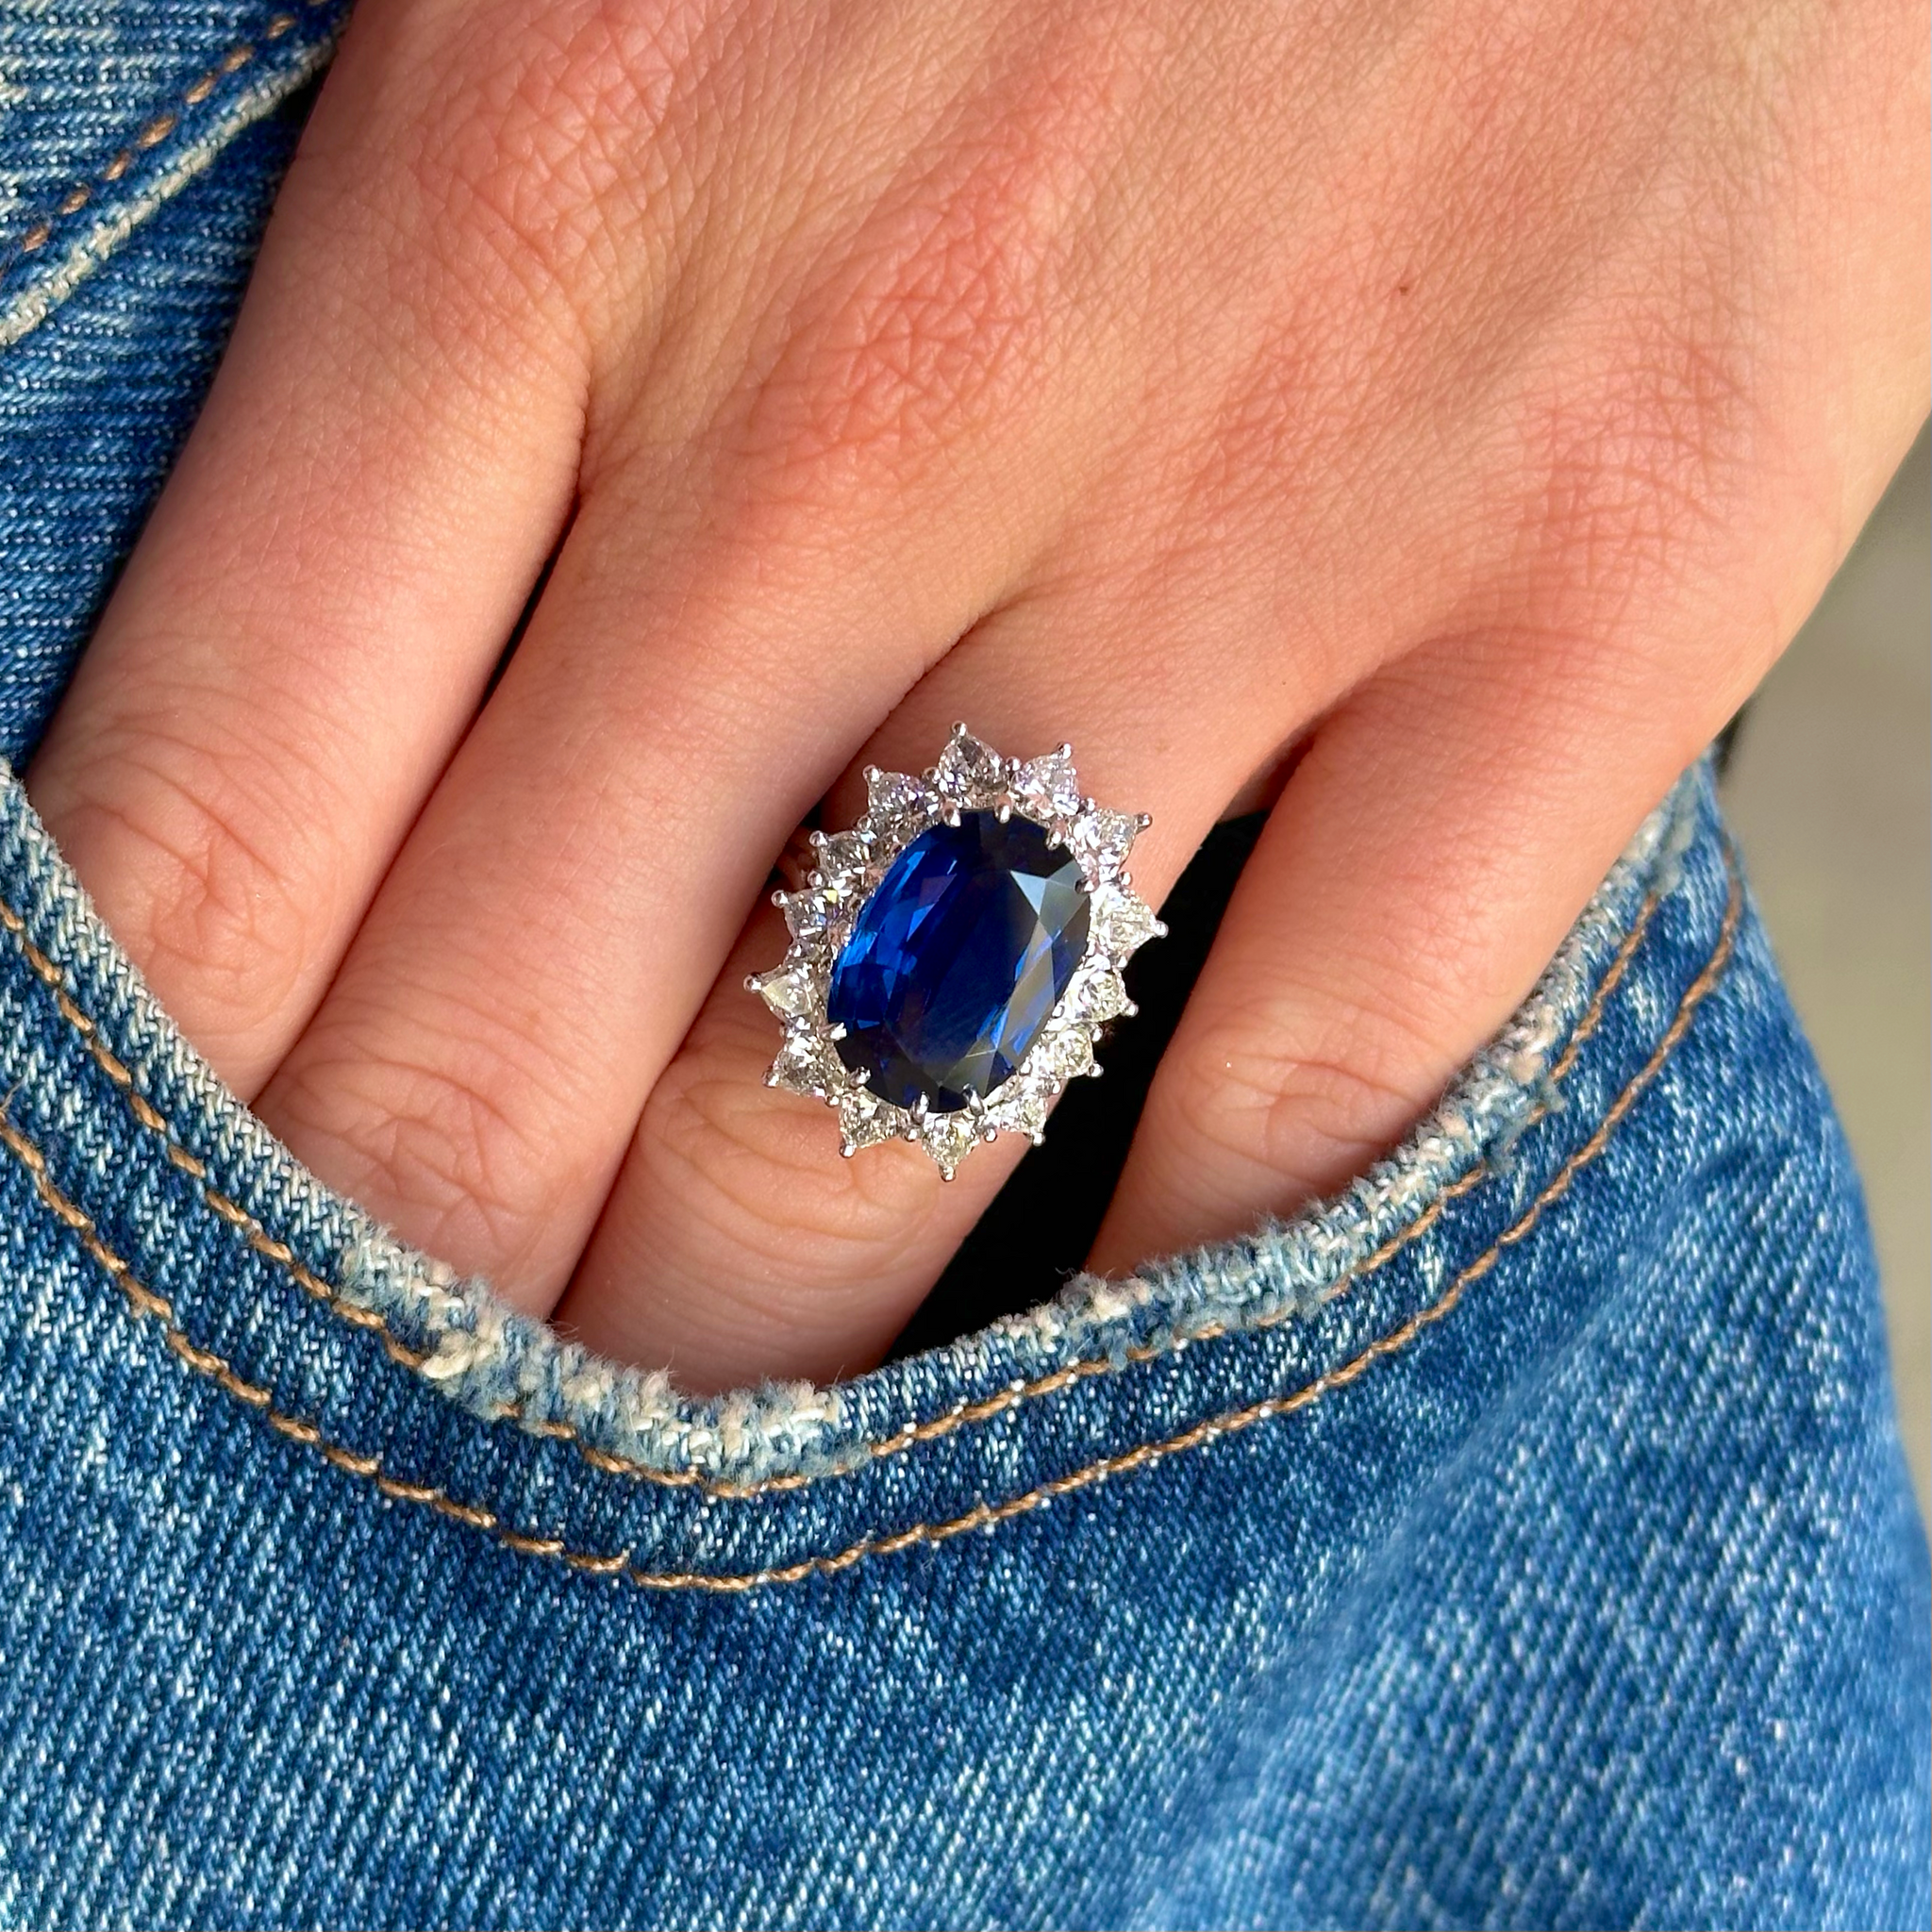 vintage sapphire and diamond cocktail cluster ring worn on hand in pocket of jeans.